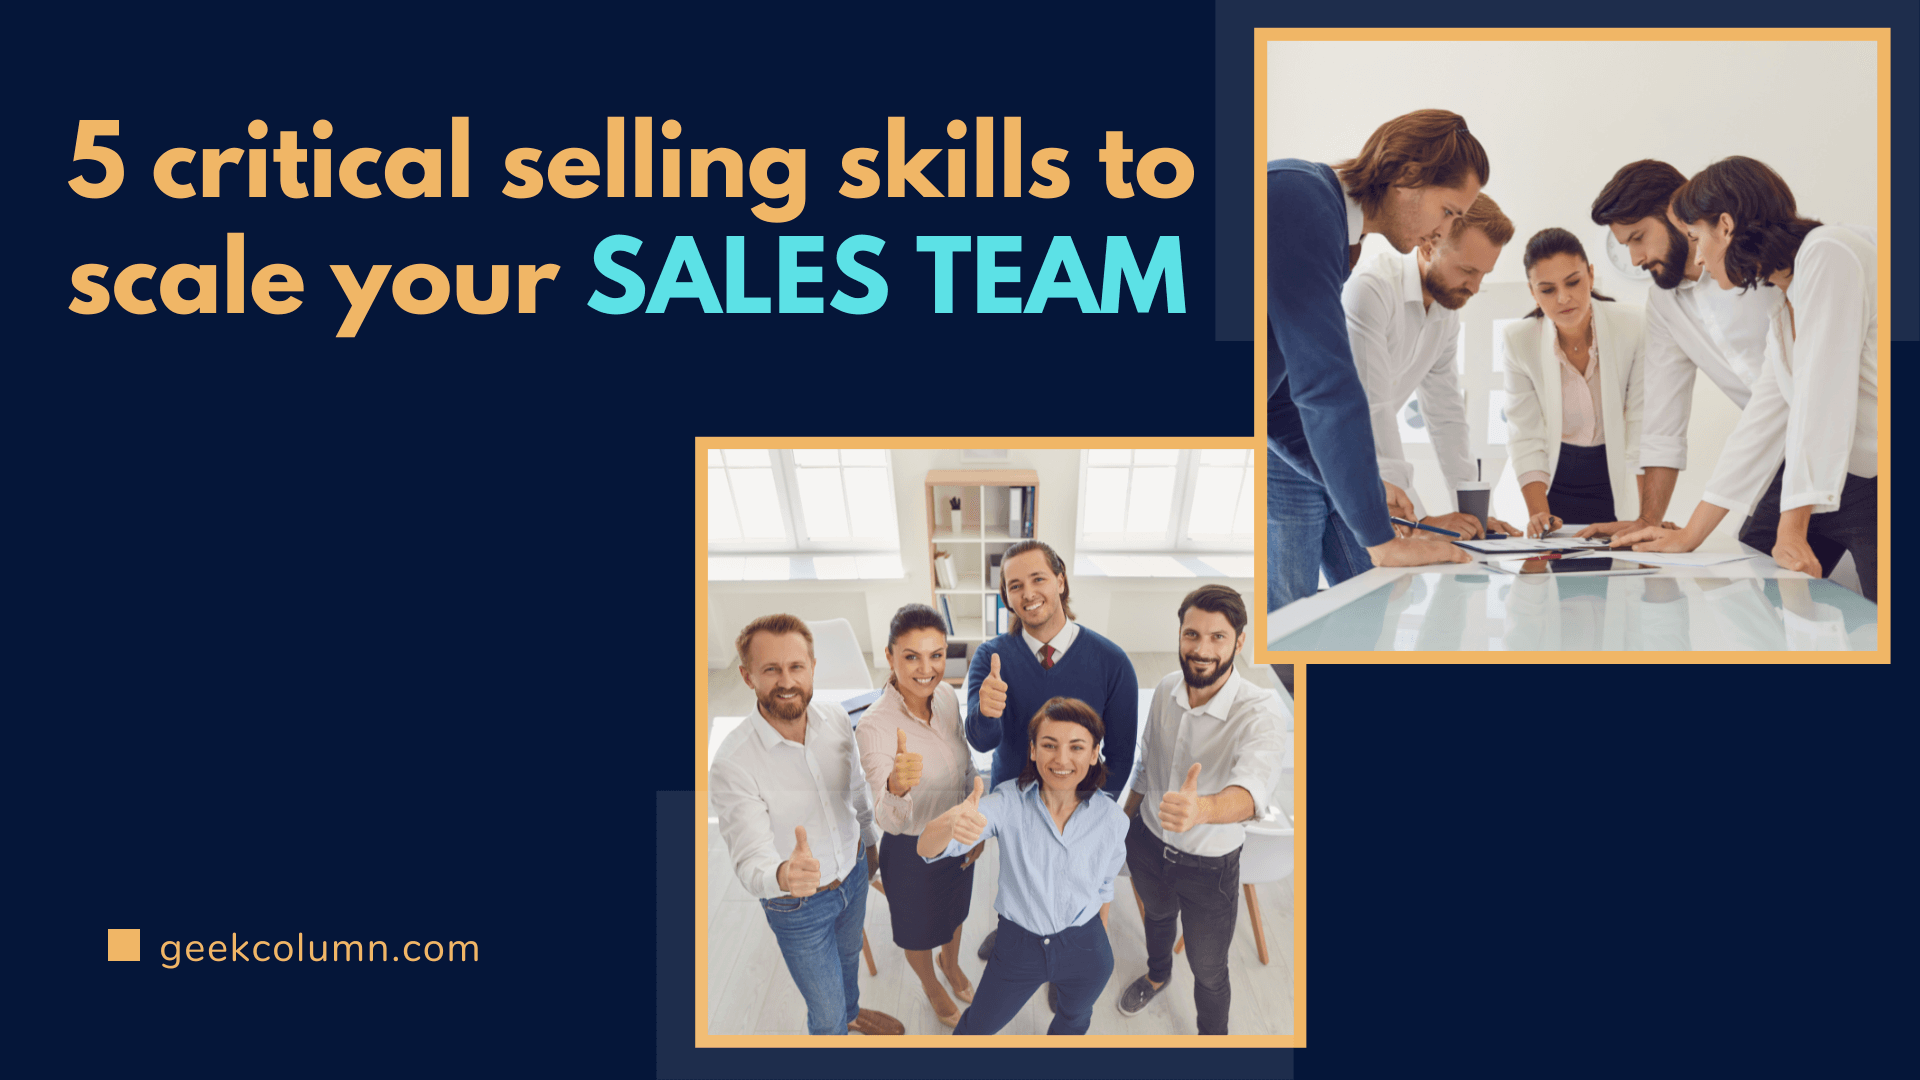 5 critical selling skills to scale your SALES TEAM